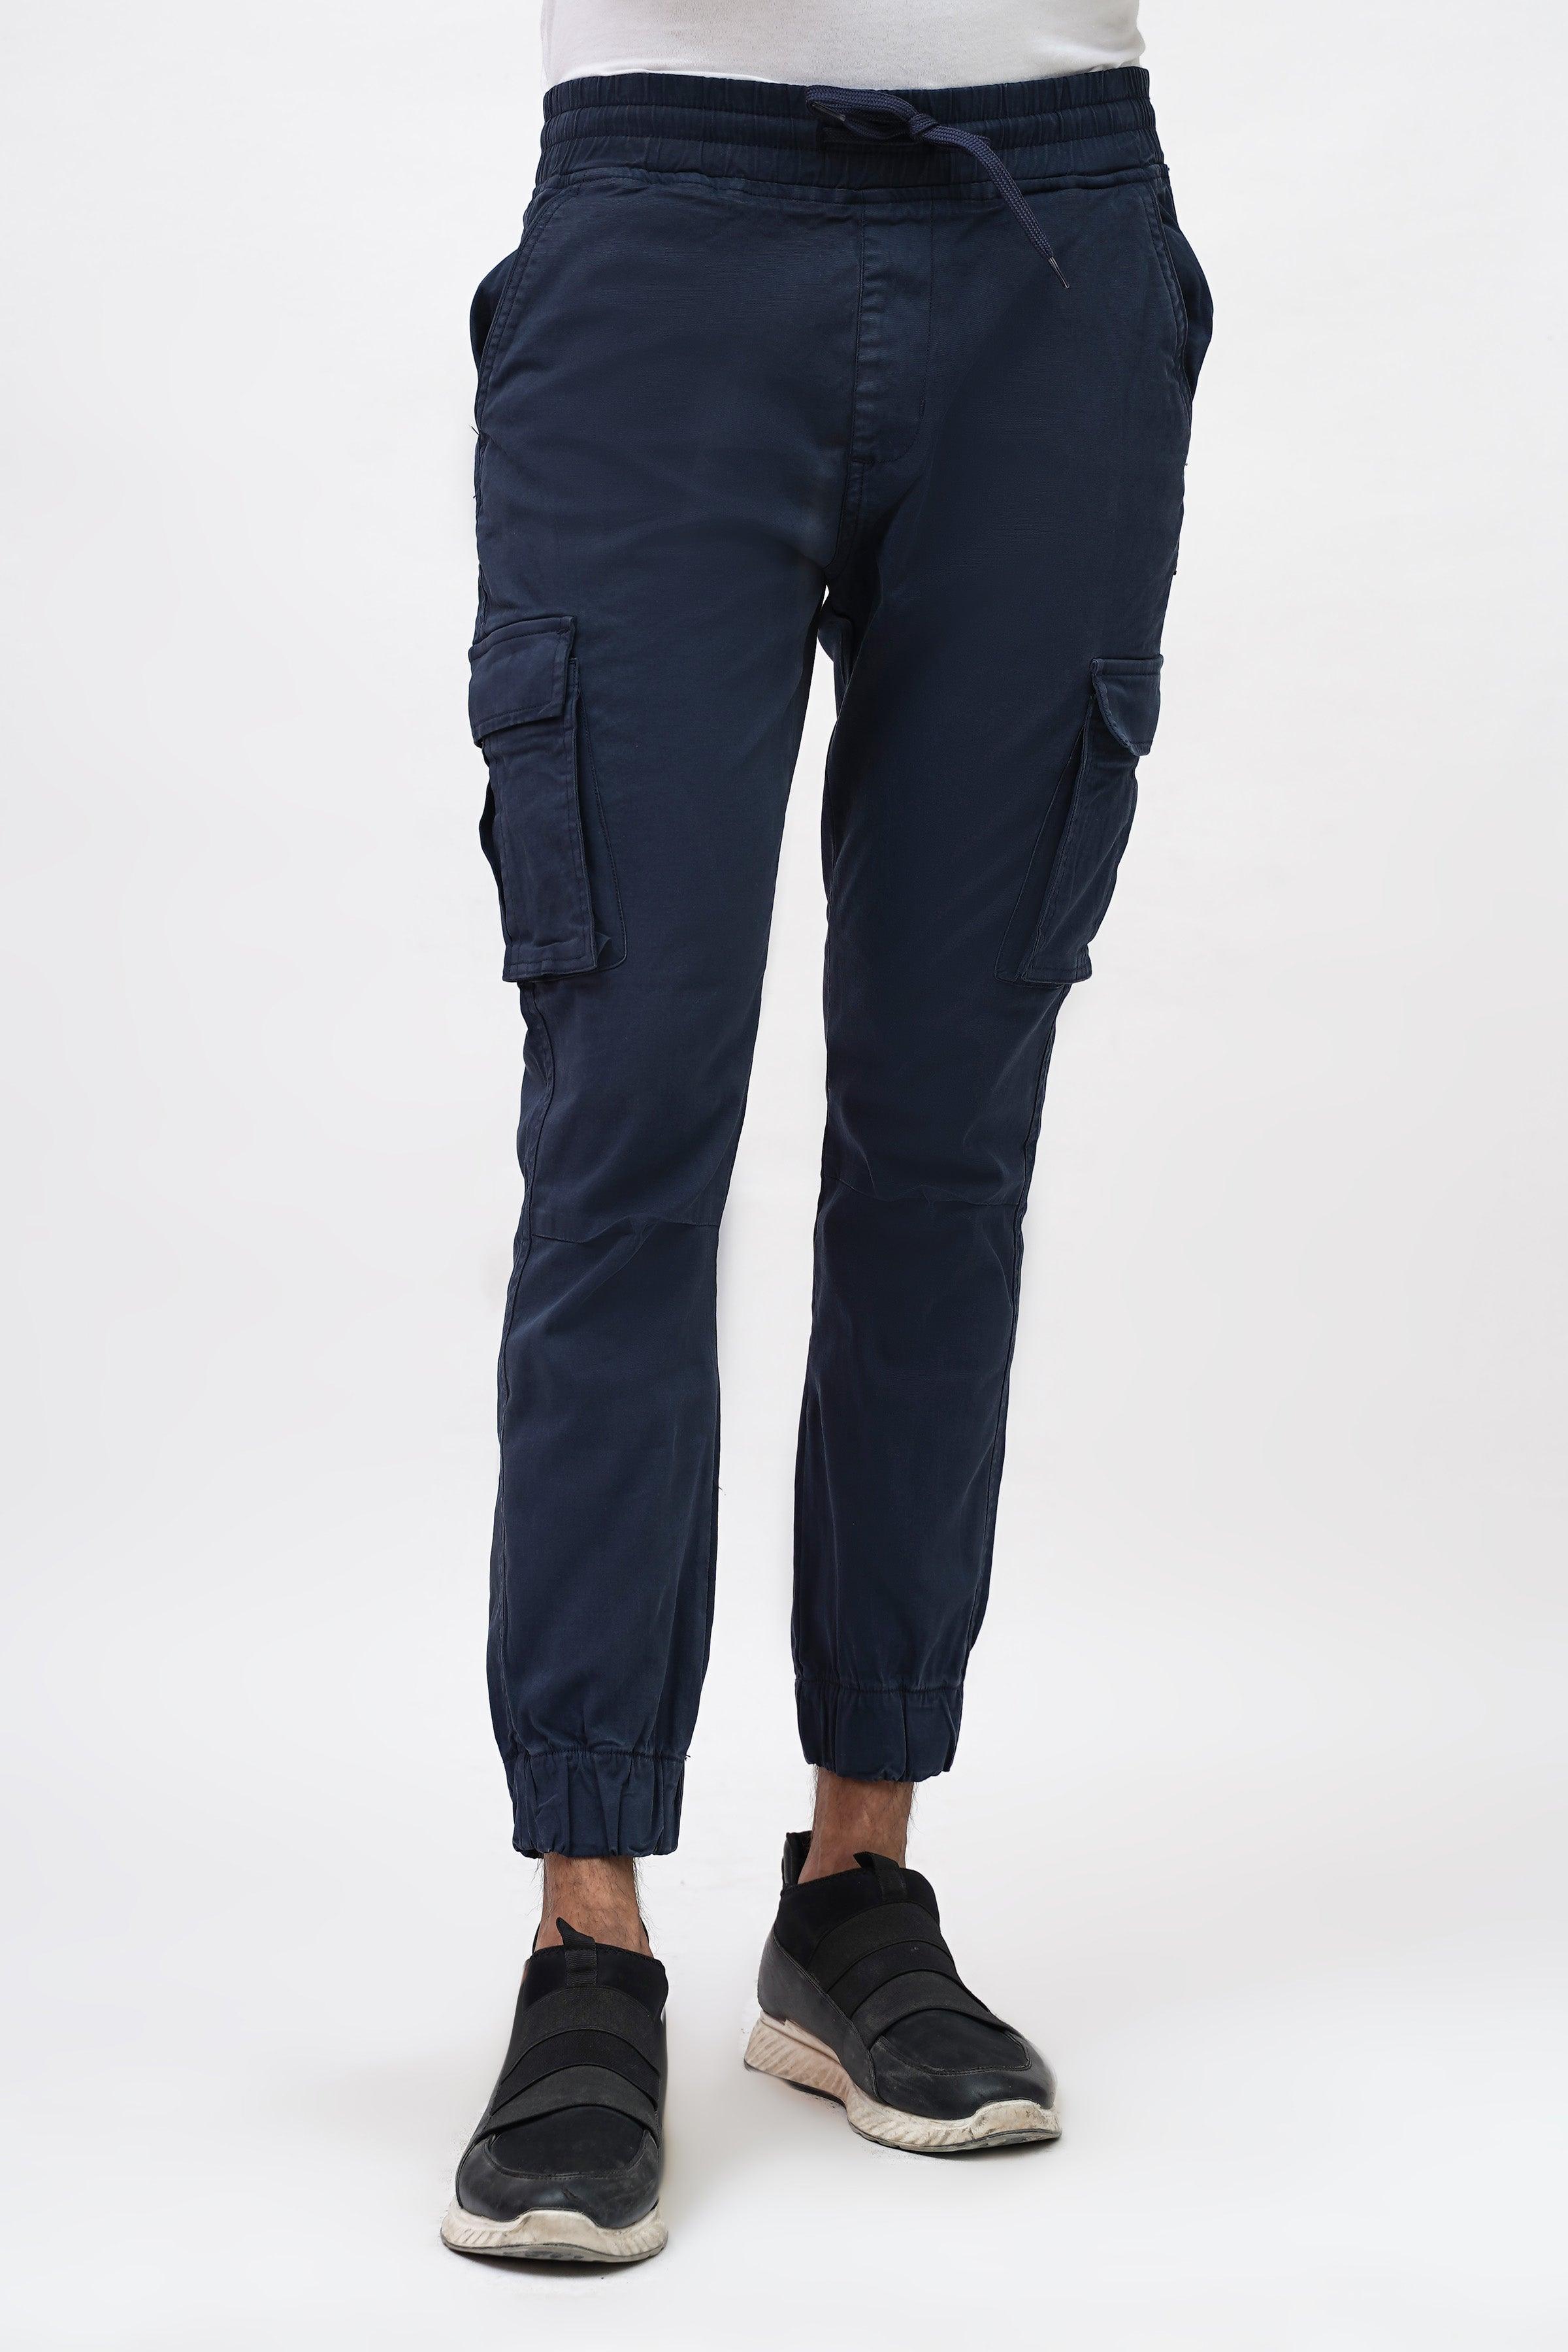 CARGO SLIM FIT NAVY TROUSER at Charcoal Clothing